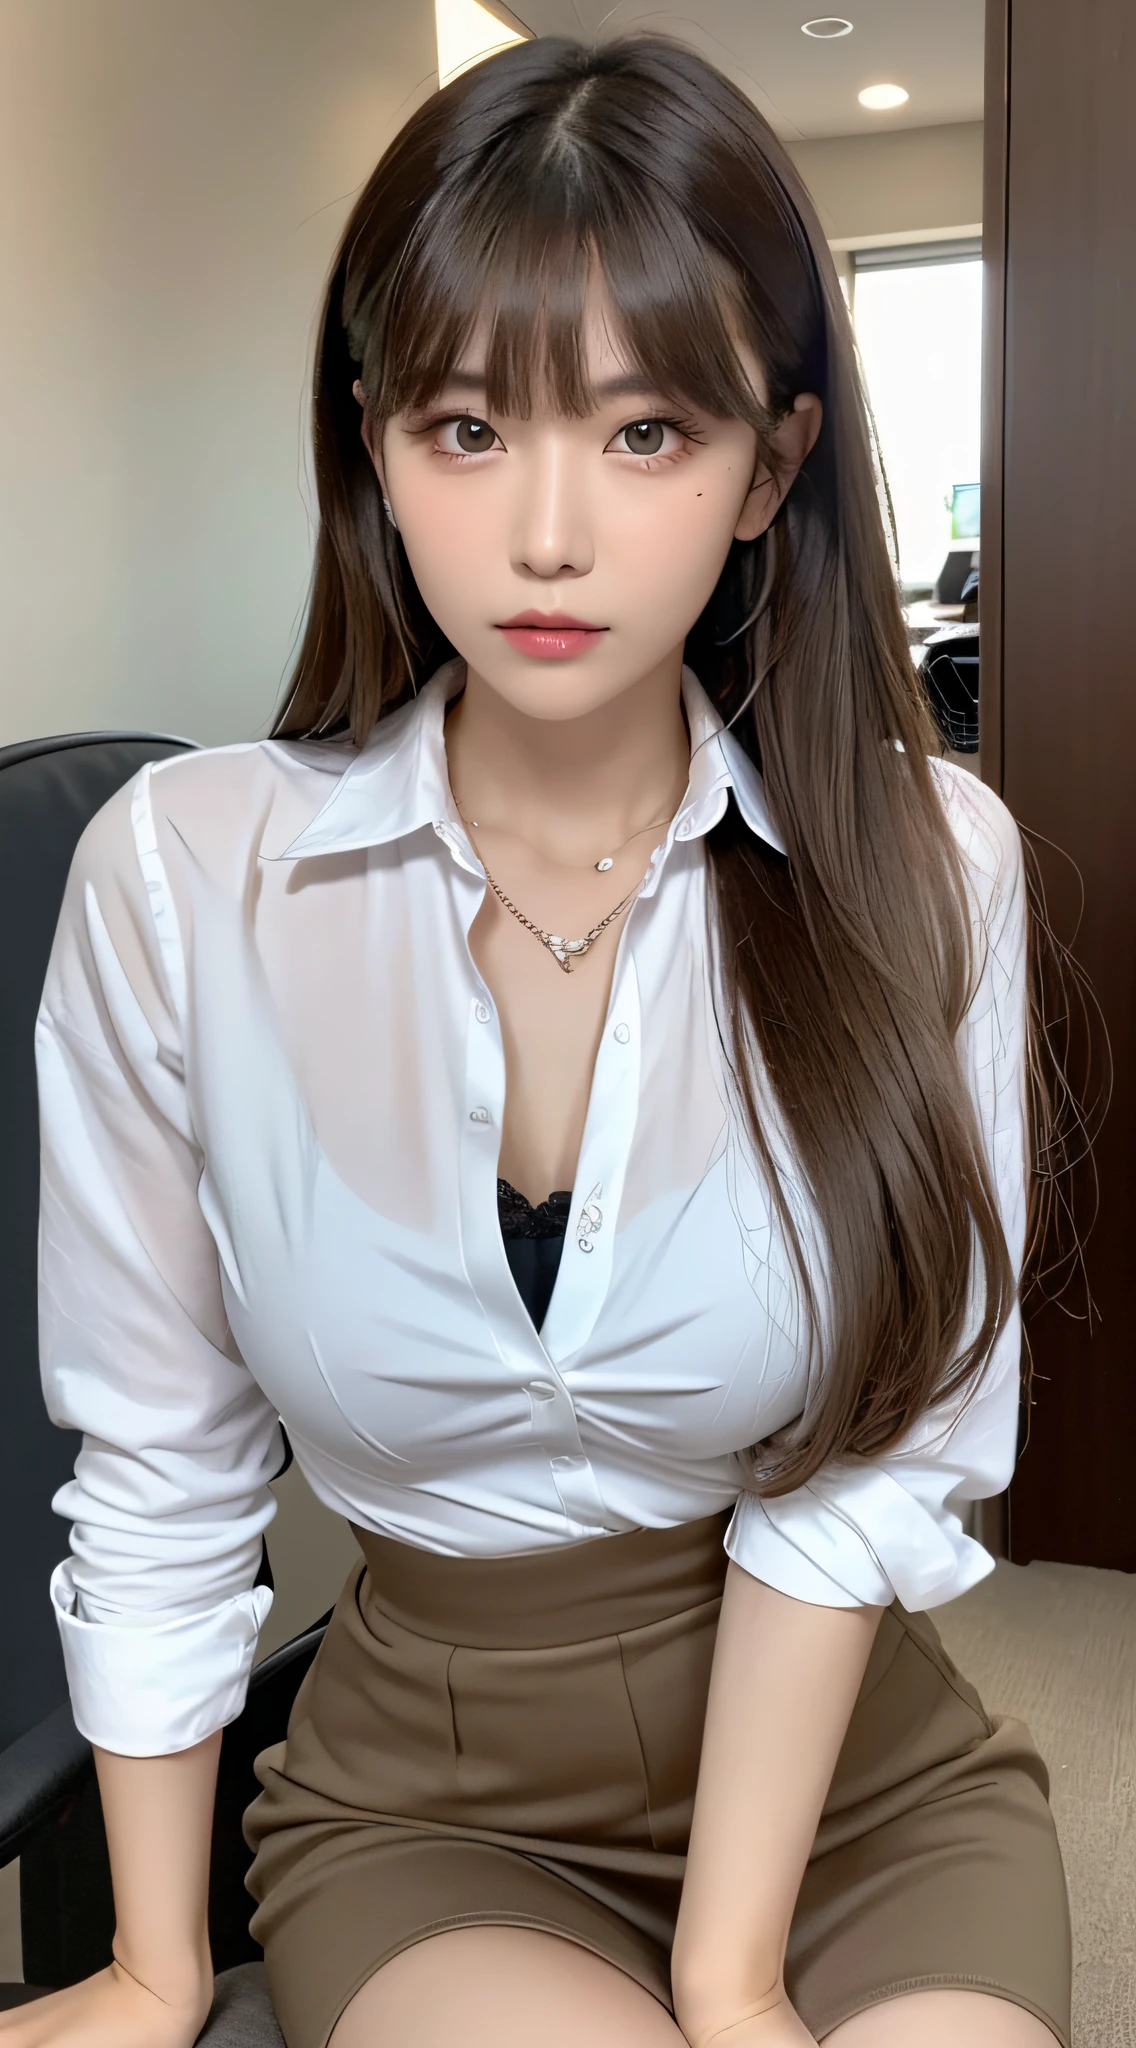 (Best Quality, 8K, masutepiece, Ultra HD: 1.3), 1girl in, mideum breasts, light brown hair, Blunt bangs, hair behind ear, hair over shoulder, Long hair,  slender body shape, Ultra Fine Face, Delicate lips, Beautiful eyes, Double eyelids, lipsticks,Facial expressions inviting a man, Ultra-thin hands, Ultra-fine fingers, shirt with collar, tight skirts , beauty legs ,pumps.s Office